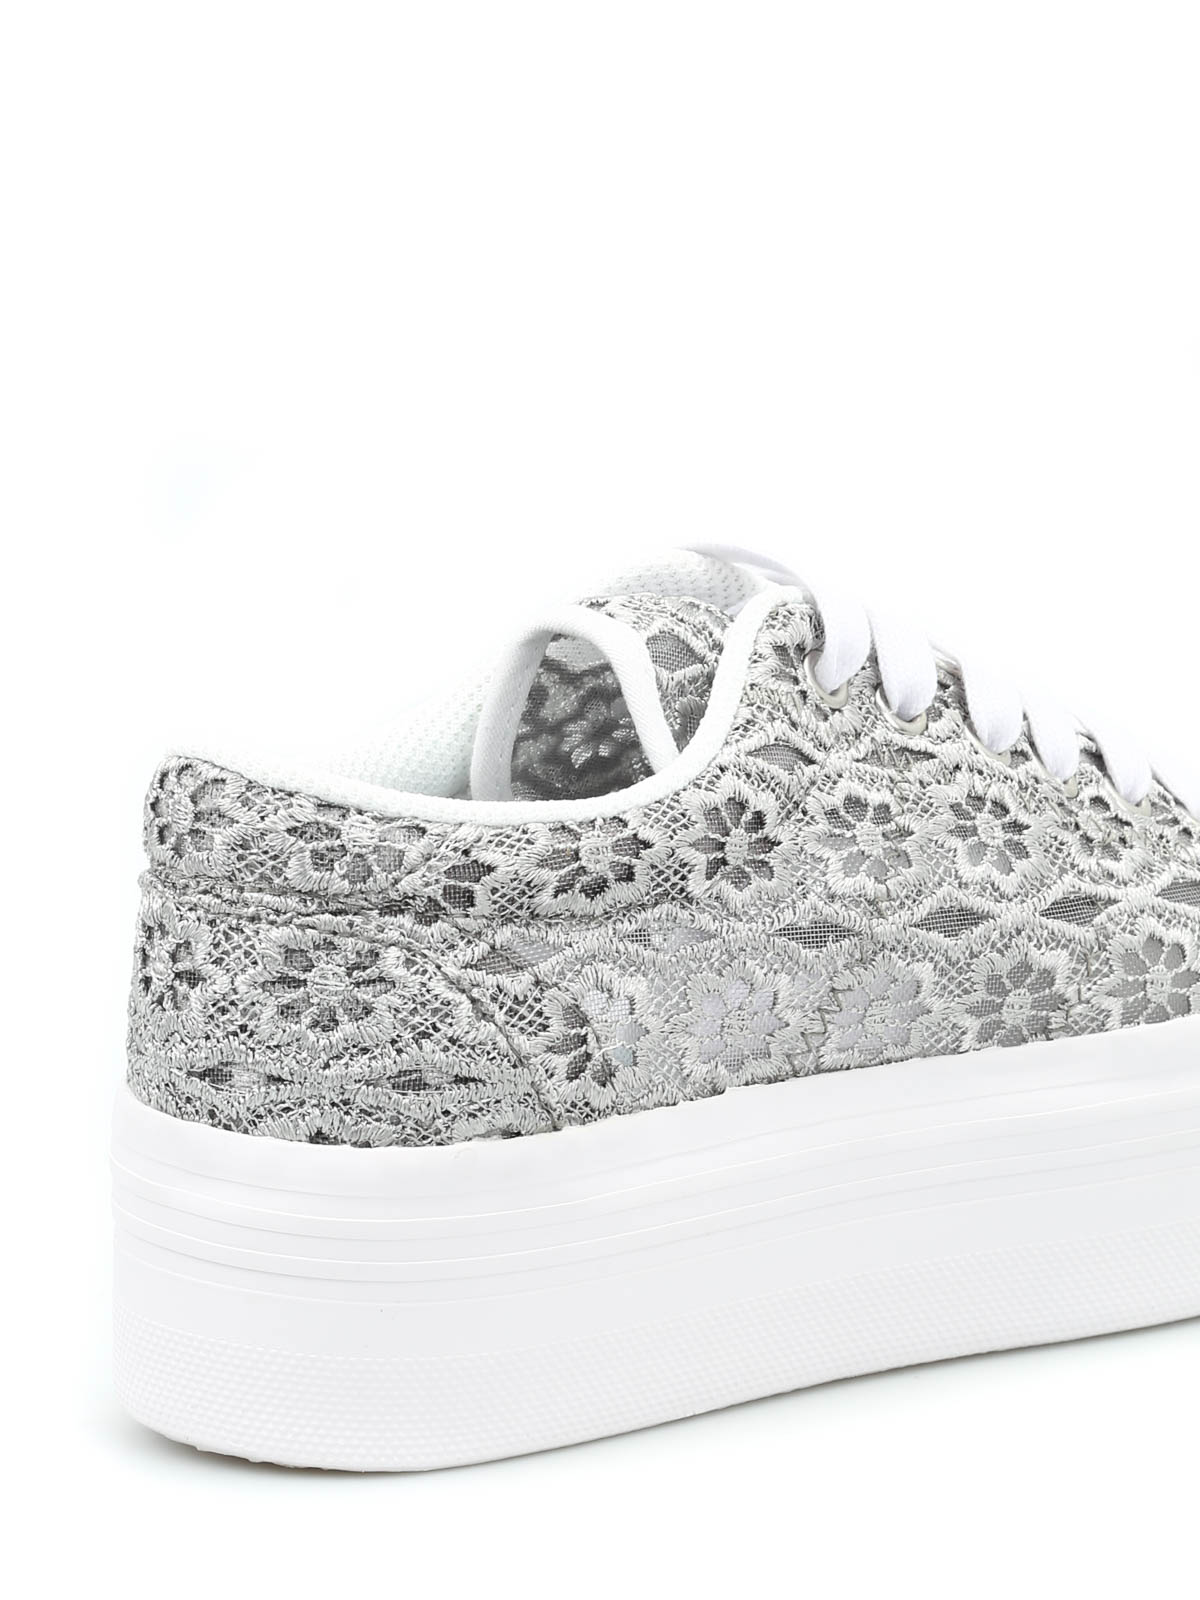 Jeffrey Campbell - Zomg lace trainers - ZOMGLACE